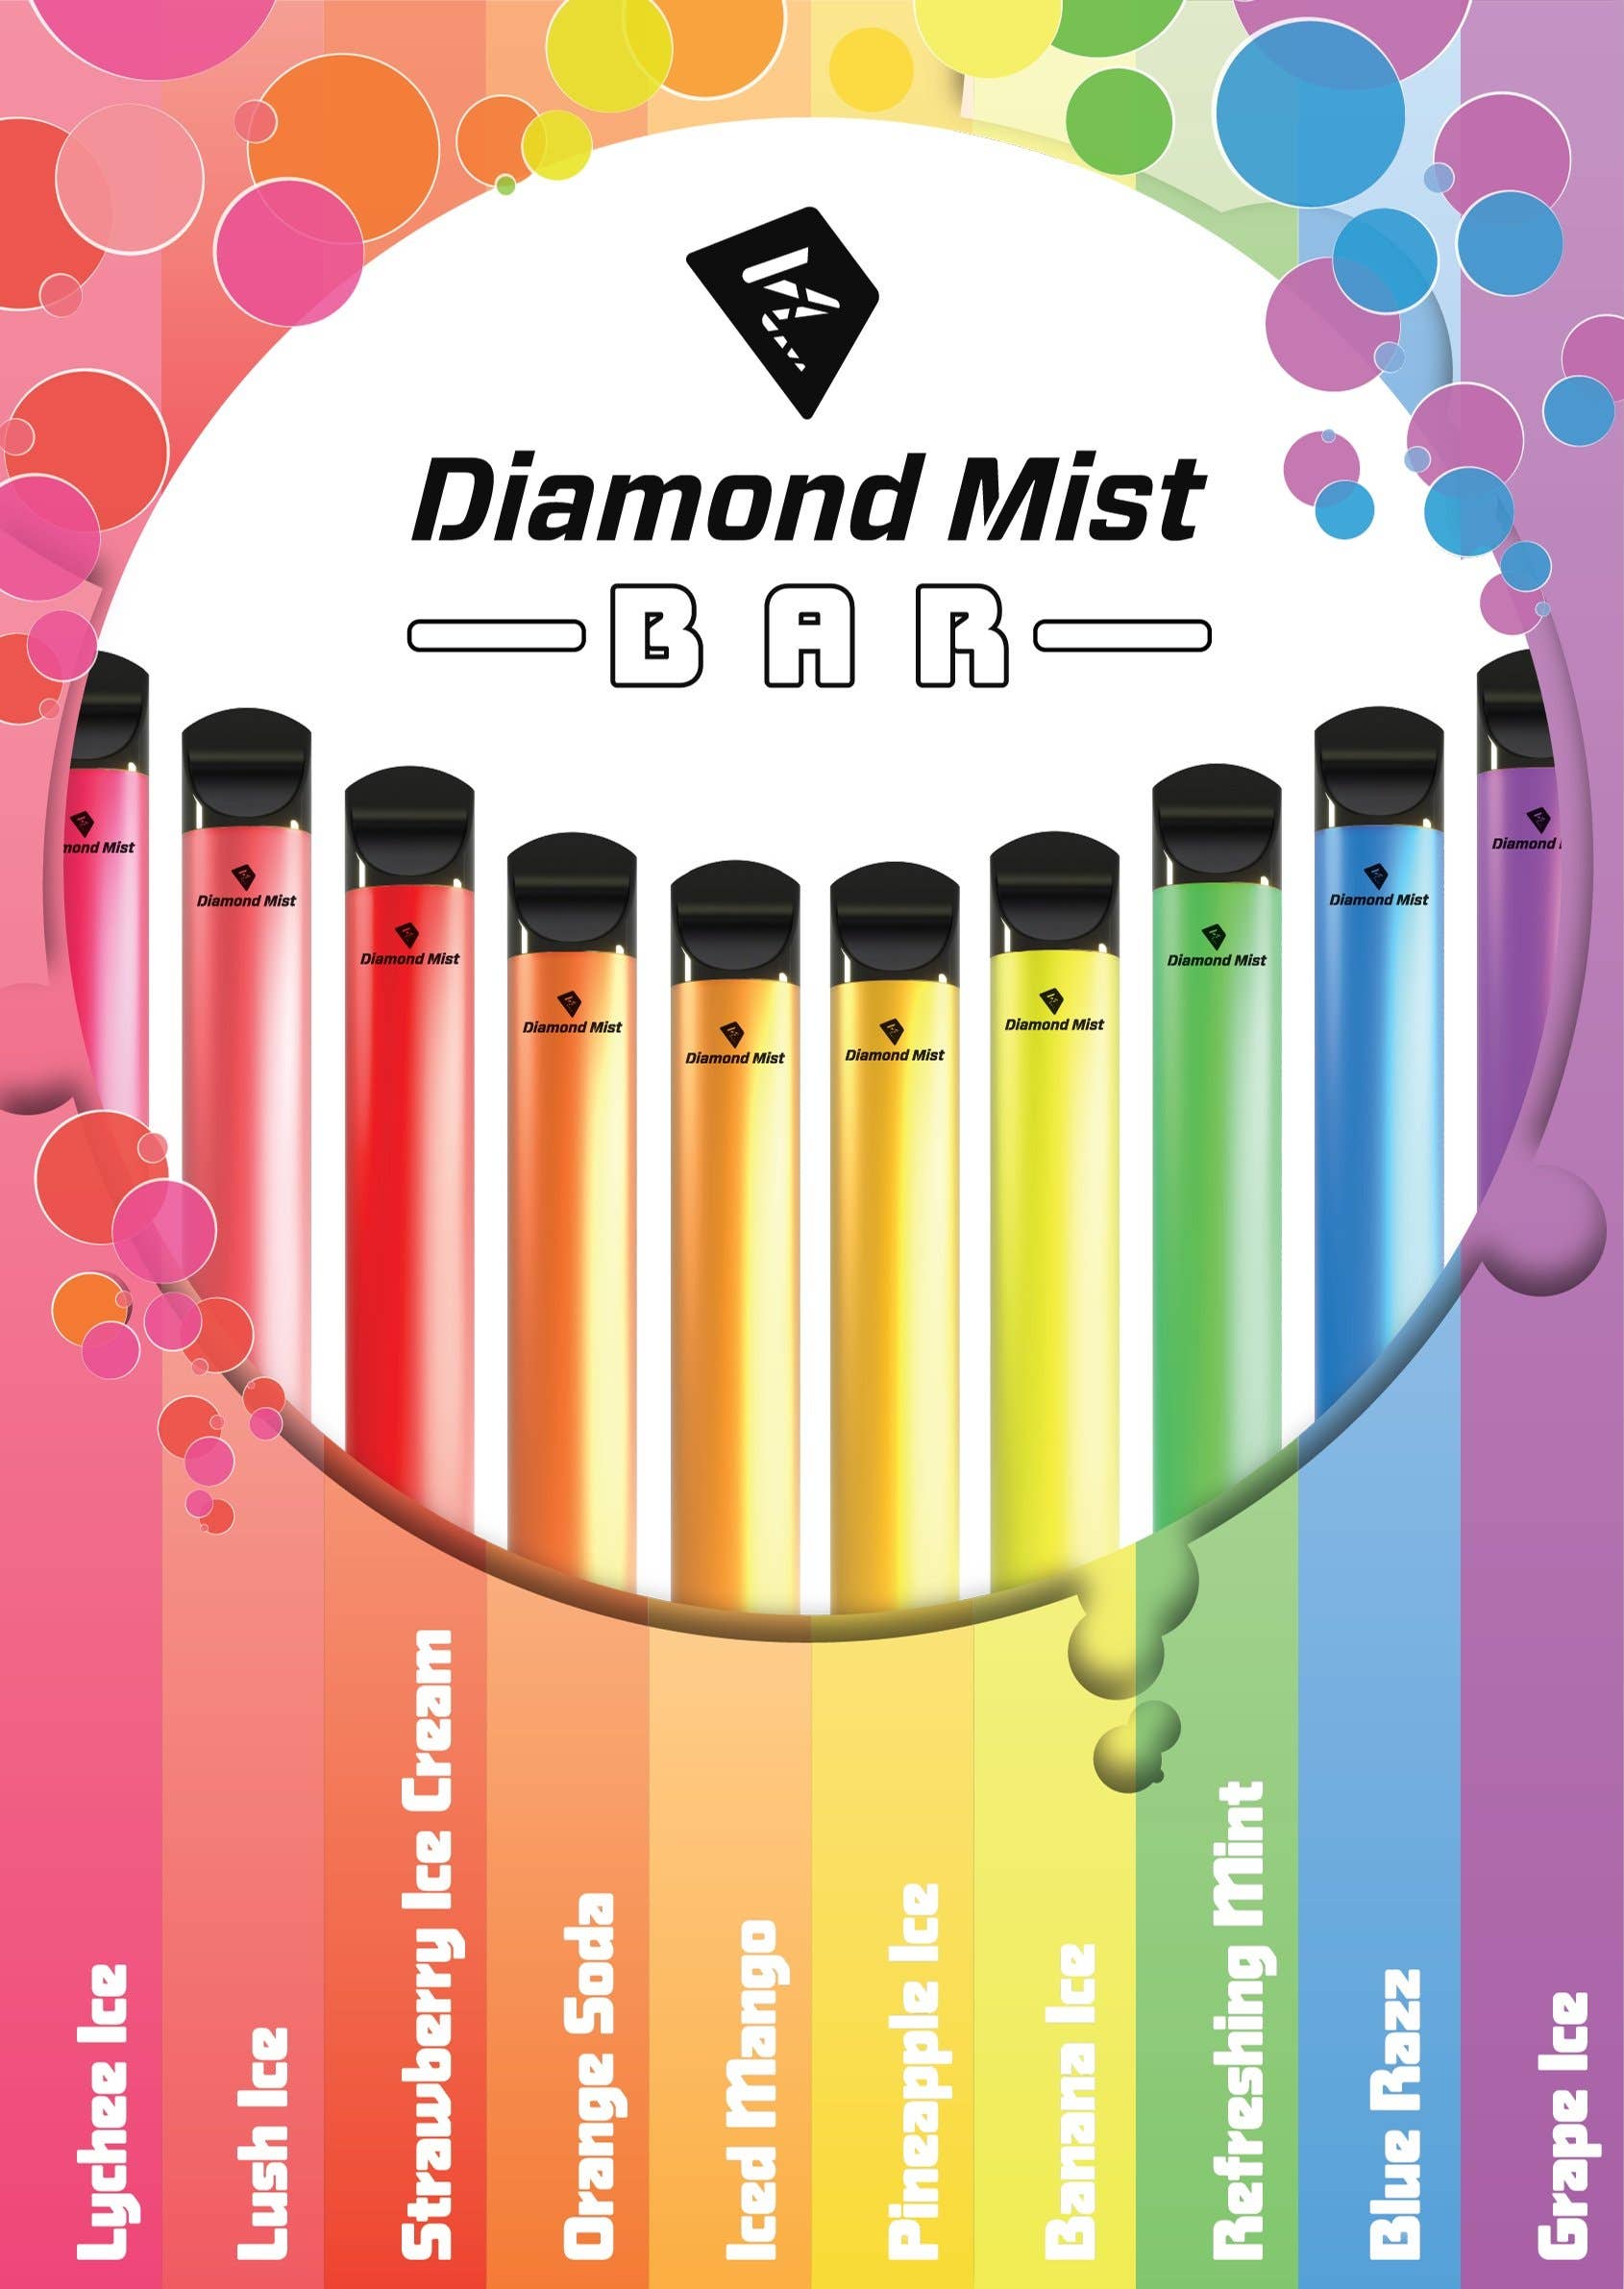 Diamond mist bar is a reliable, disposable vape device which is available in ten flavours